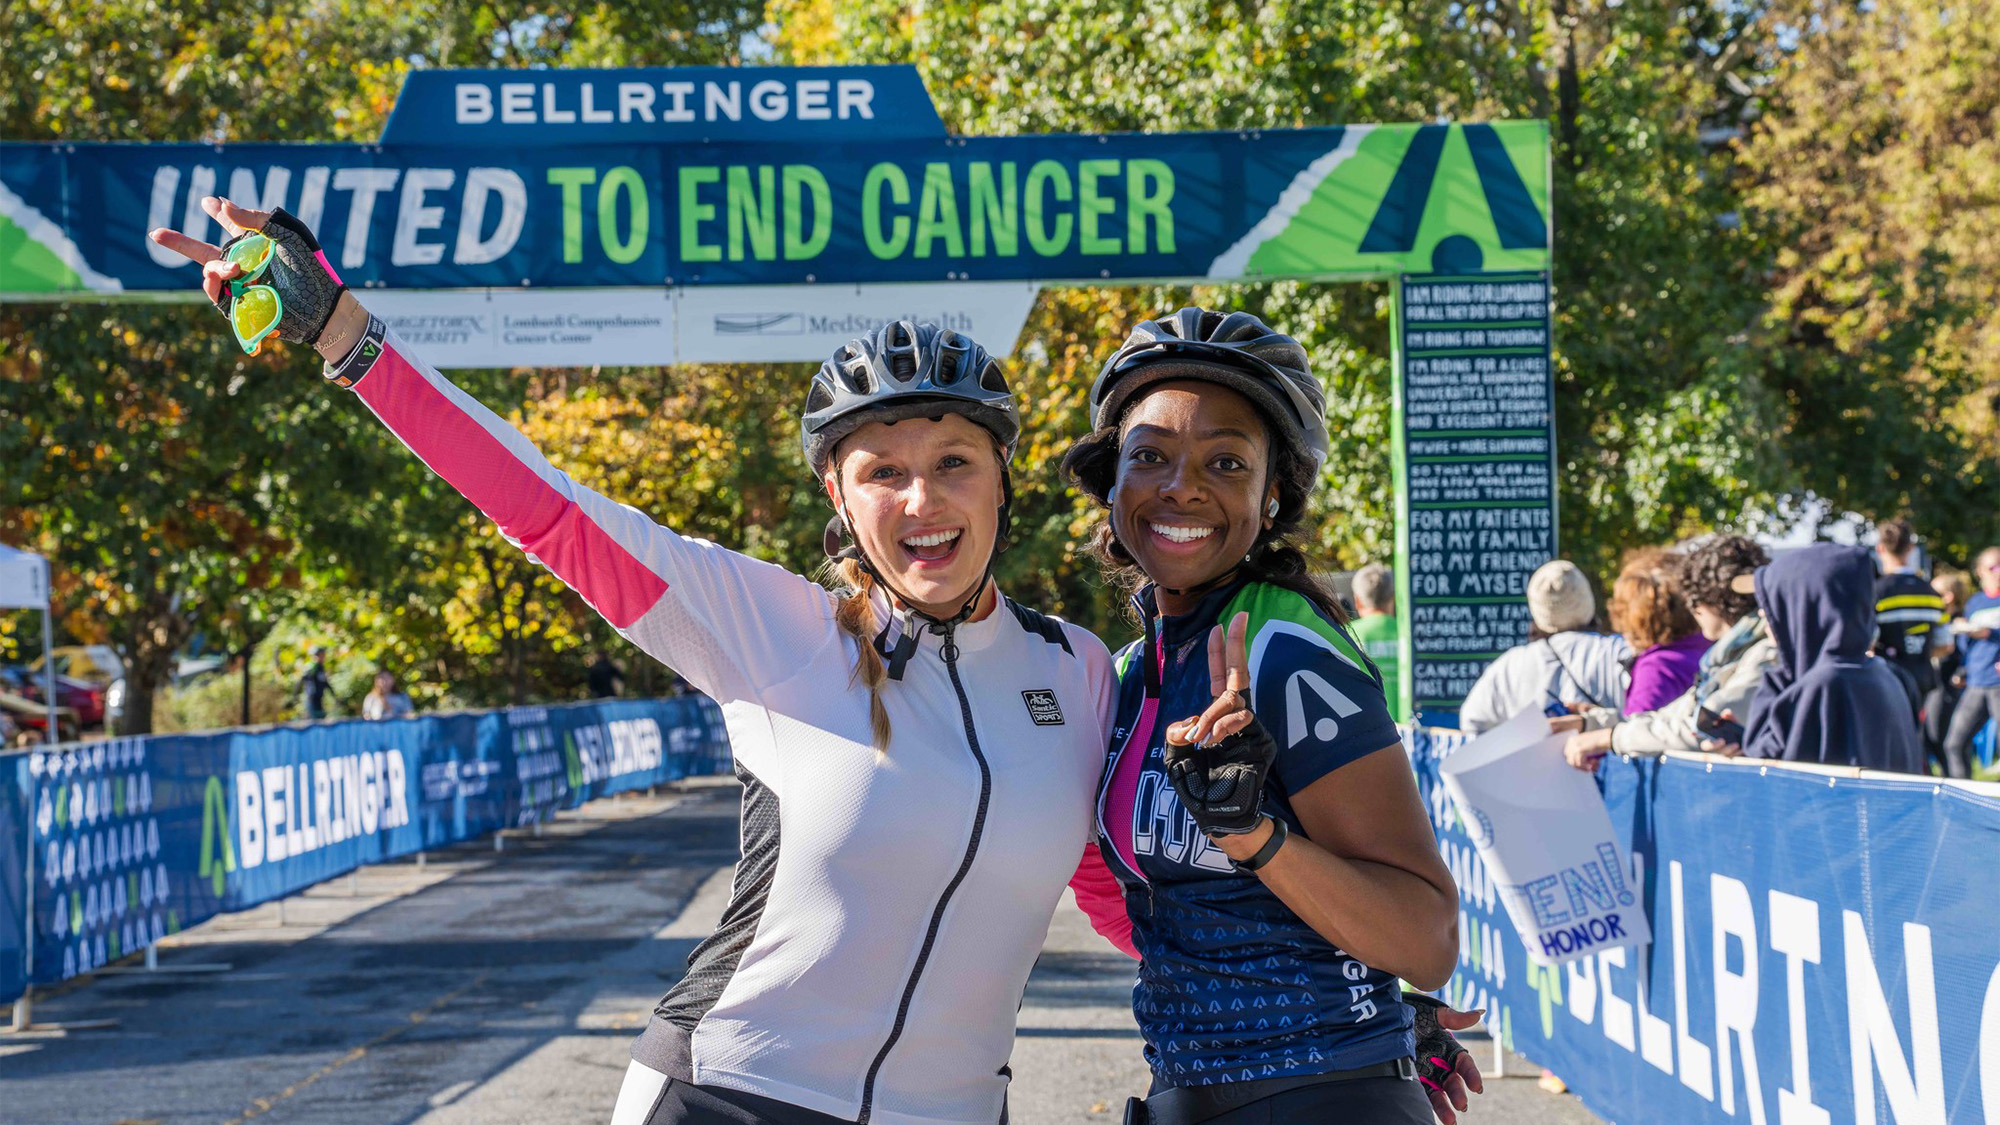 Two women celebrate at the 25-mile finish line at this year's BellRinger